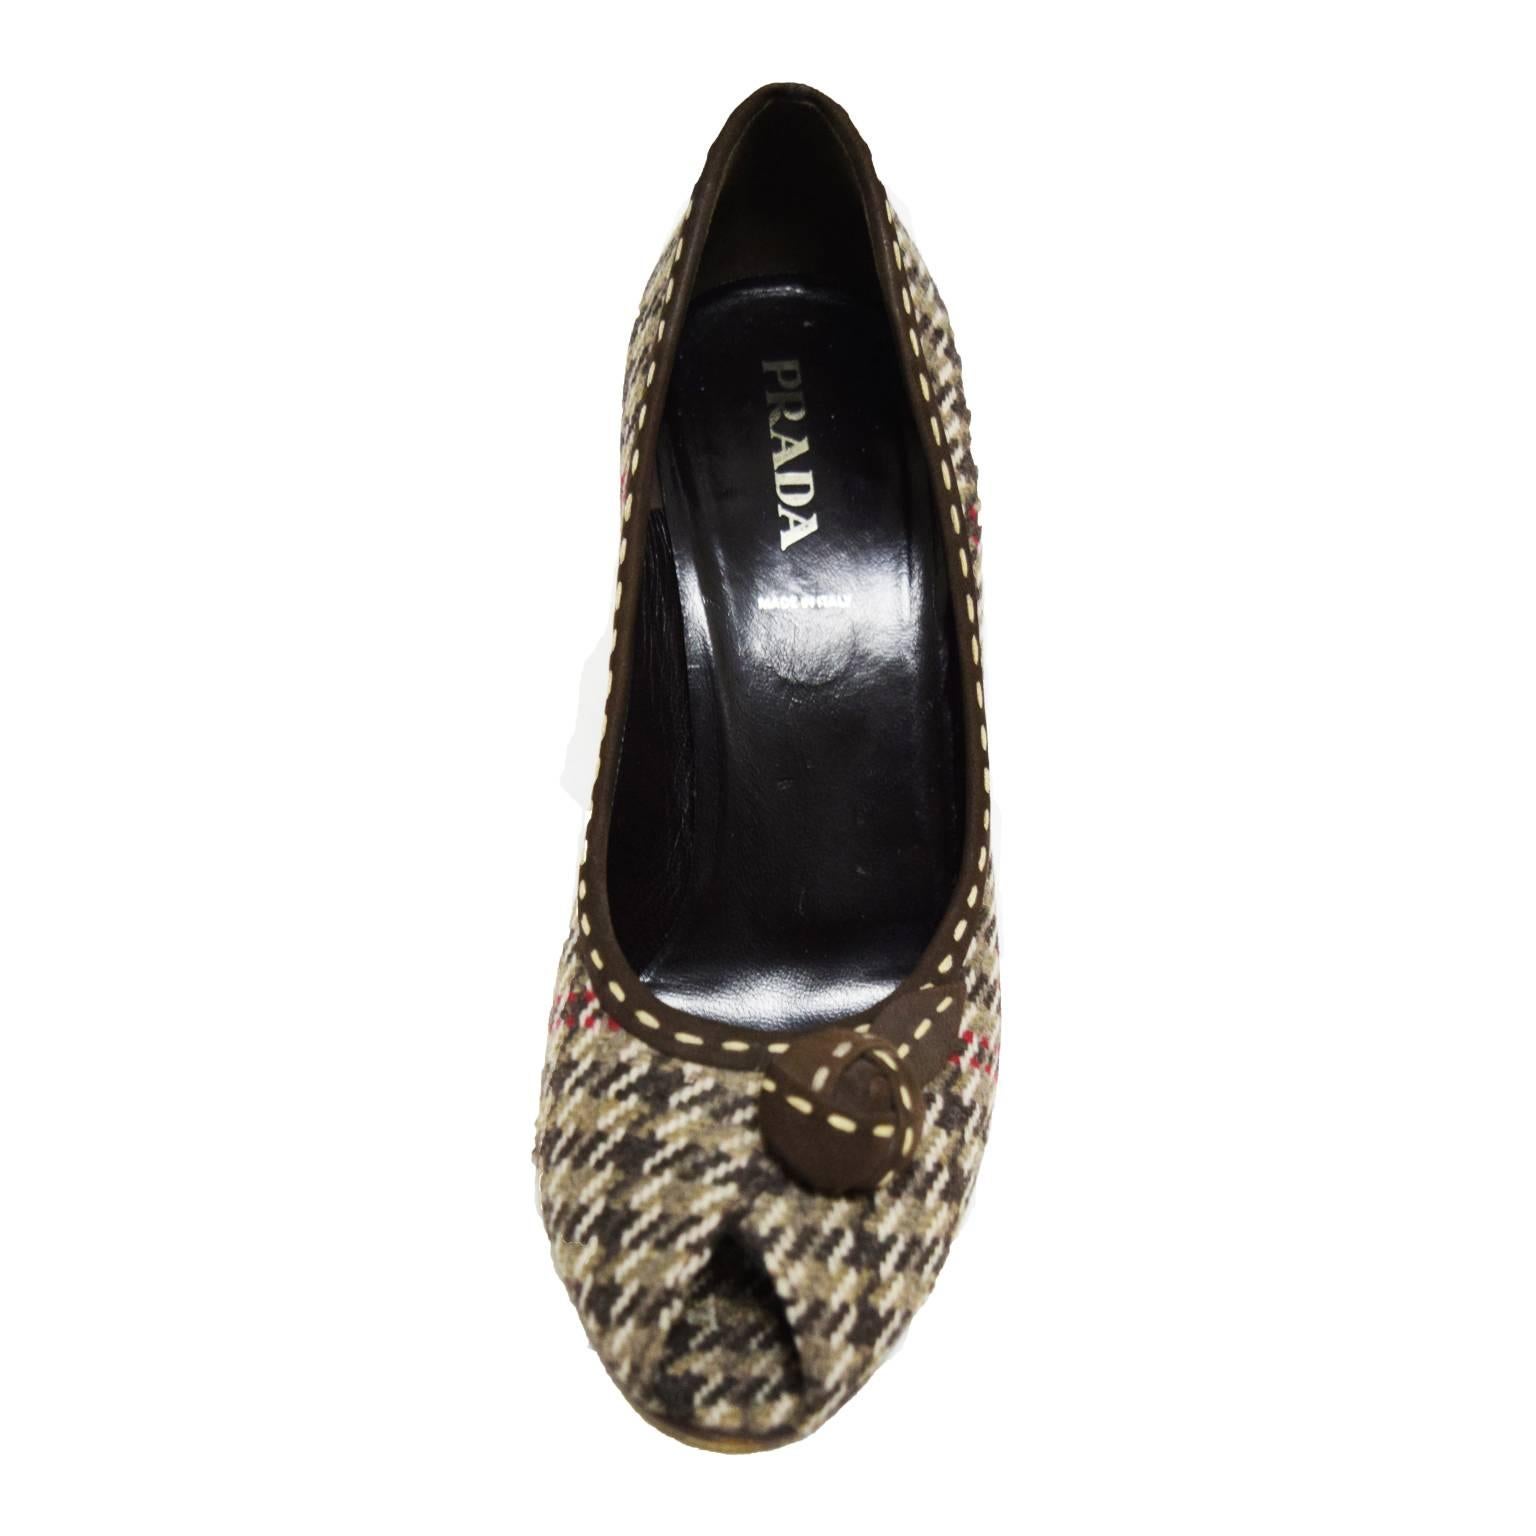 These unique Prada wool pumps are incased in wool with a neutral houndstooth print. On the upper is a suede floret with ivory stitching for a playful contrast.  